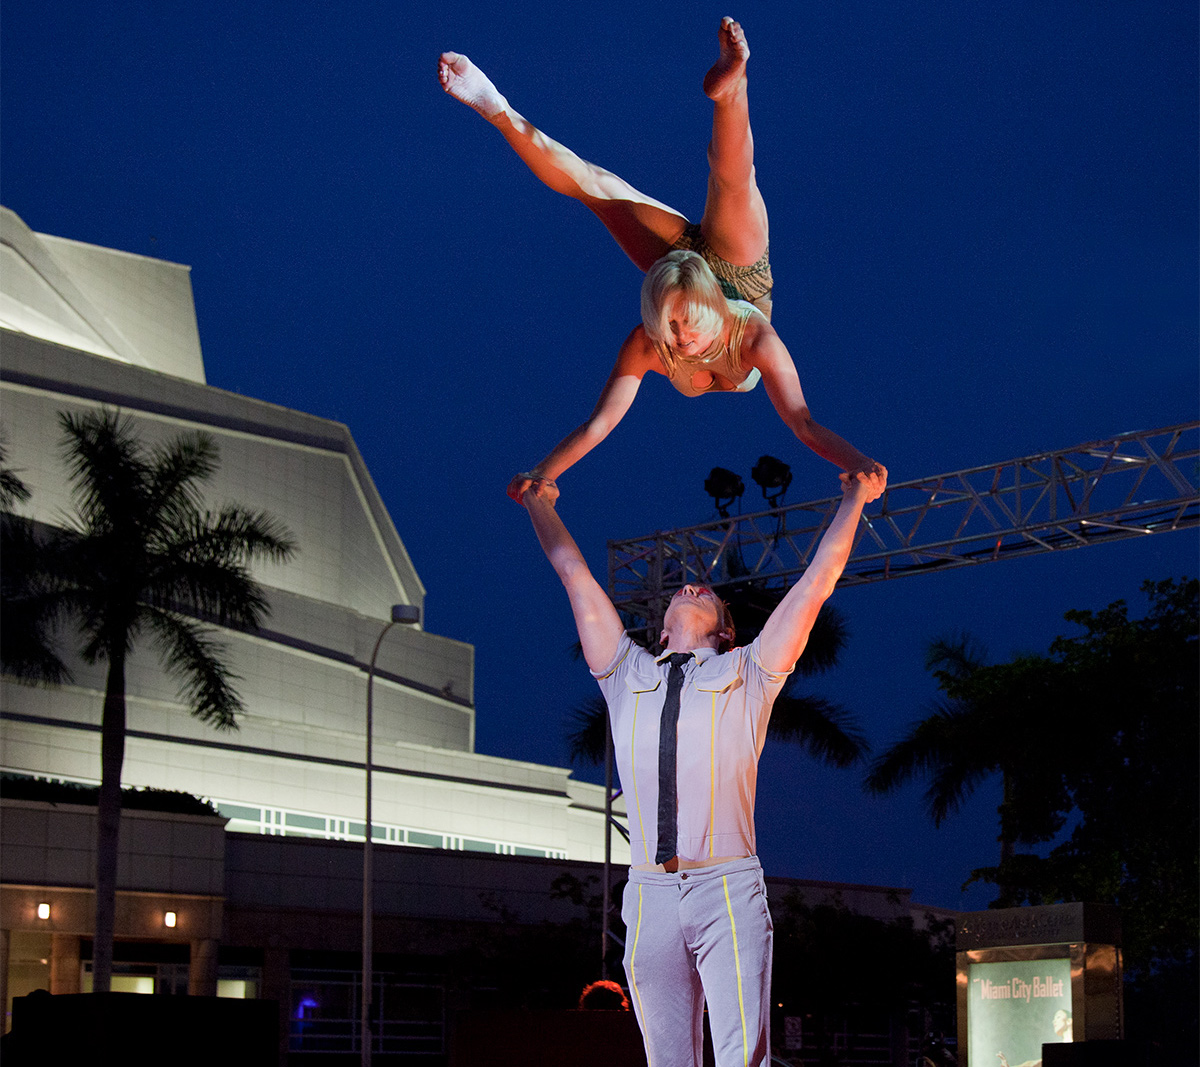 Dance performance at the Miami Adrienne Arsht Center for Performing Arts.